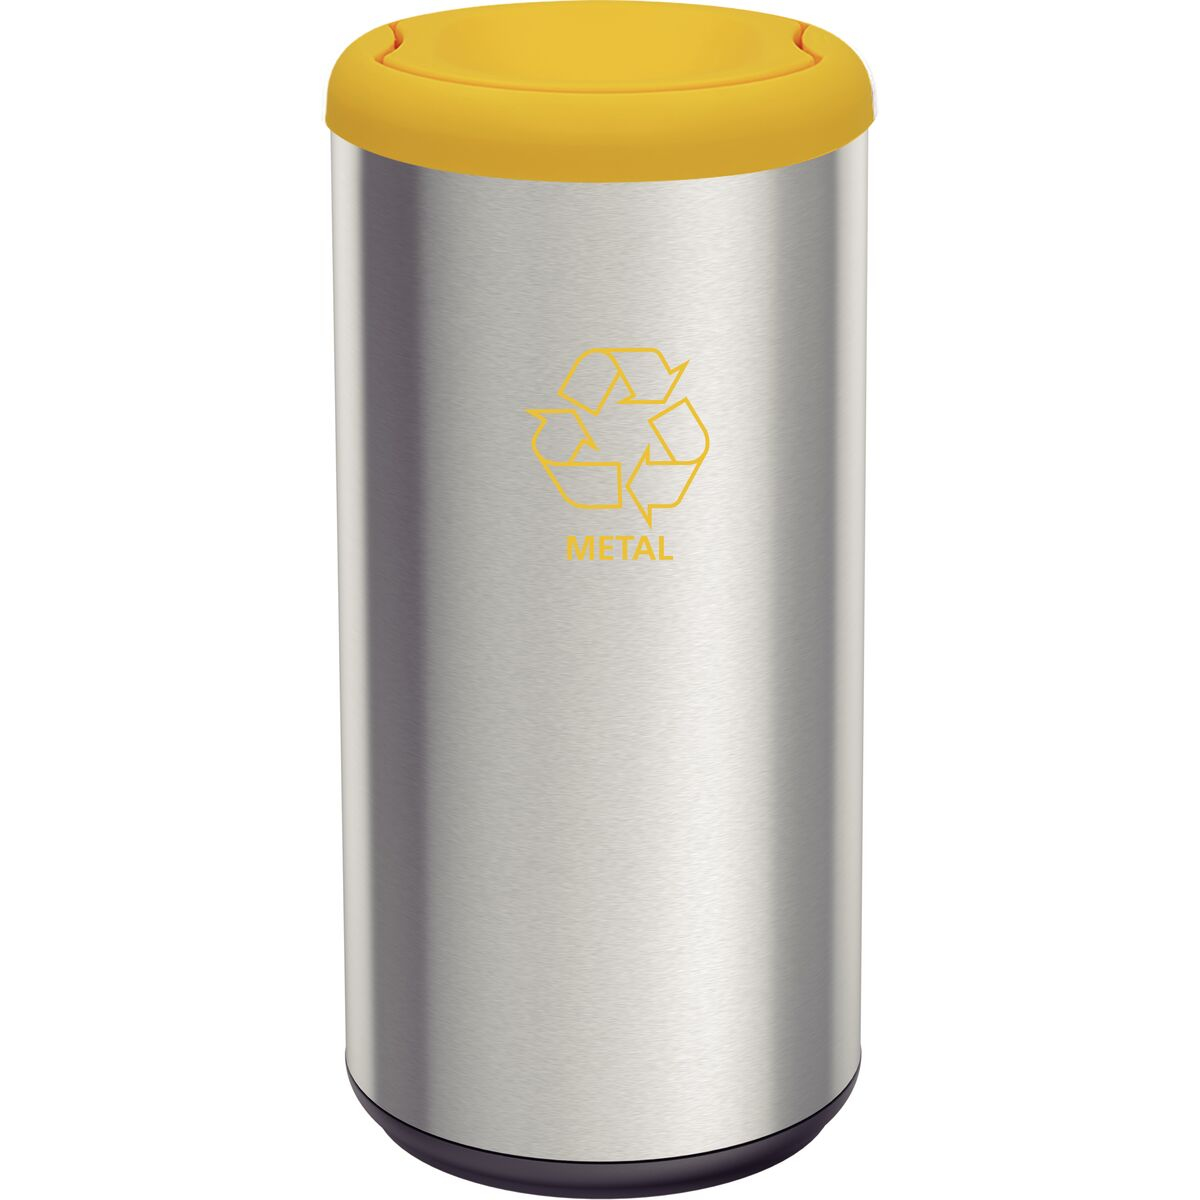 Tramontina 40L stainless steel Piemonte swing bin with a Scotch Brite finish, with a yellow polypropylene lid